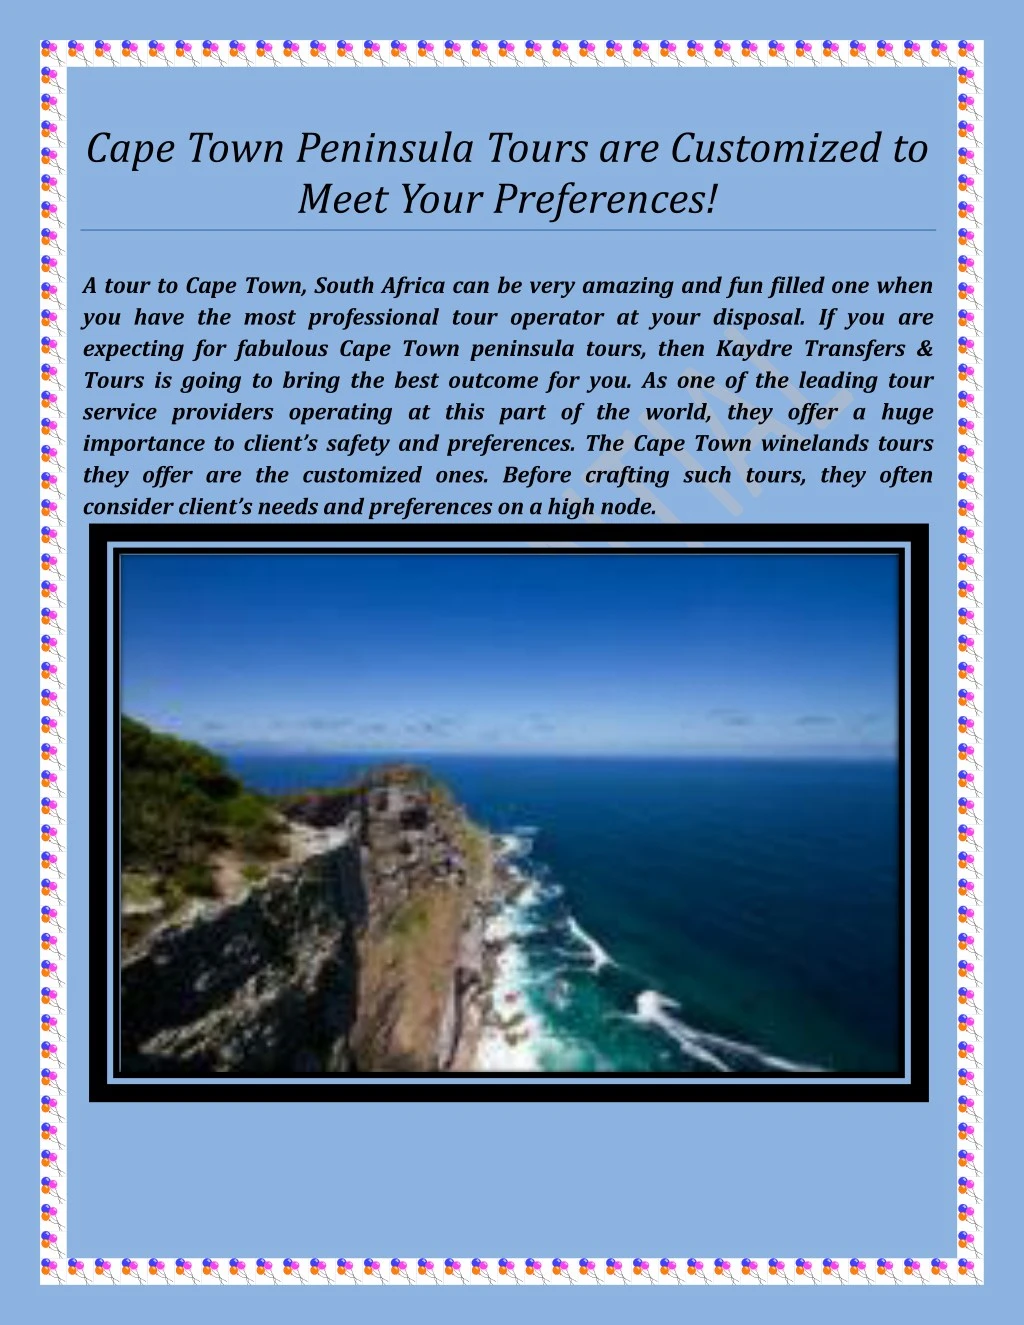 cape town peninsula tours are customized to meet